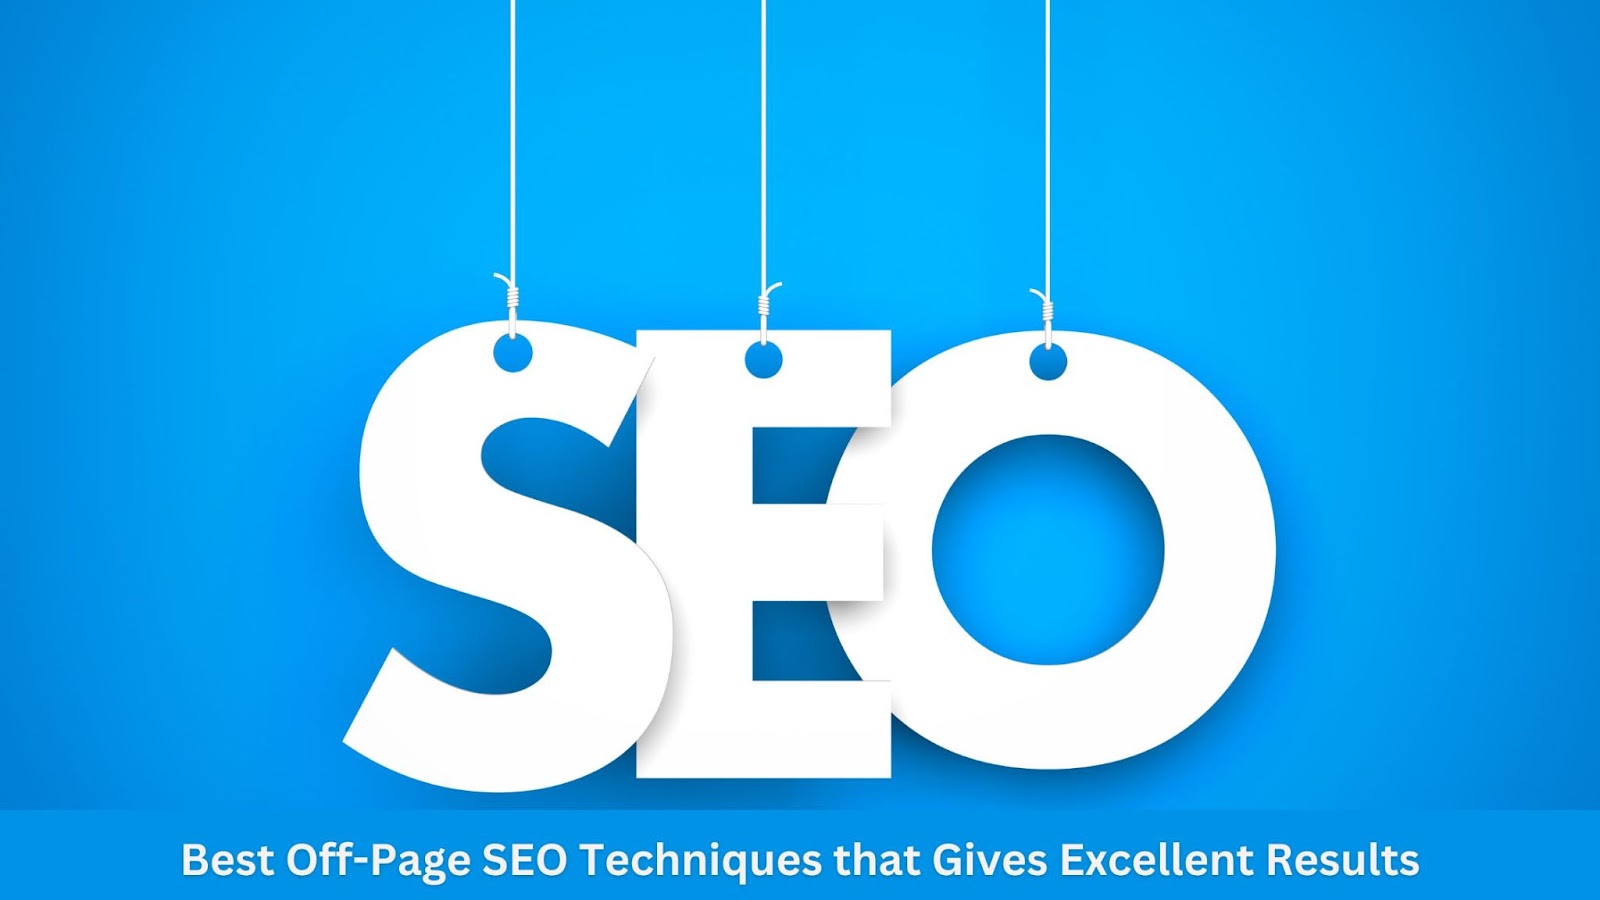 Best Off-Page SEO Techniques that Gives Excellent Results